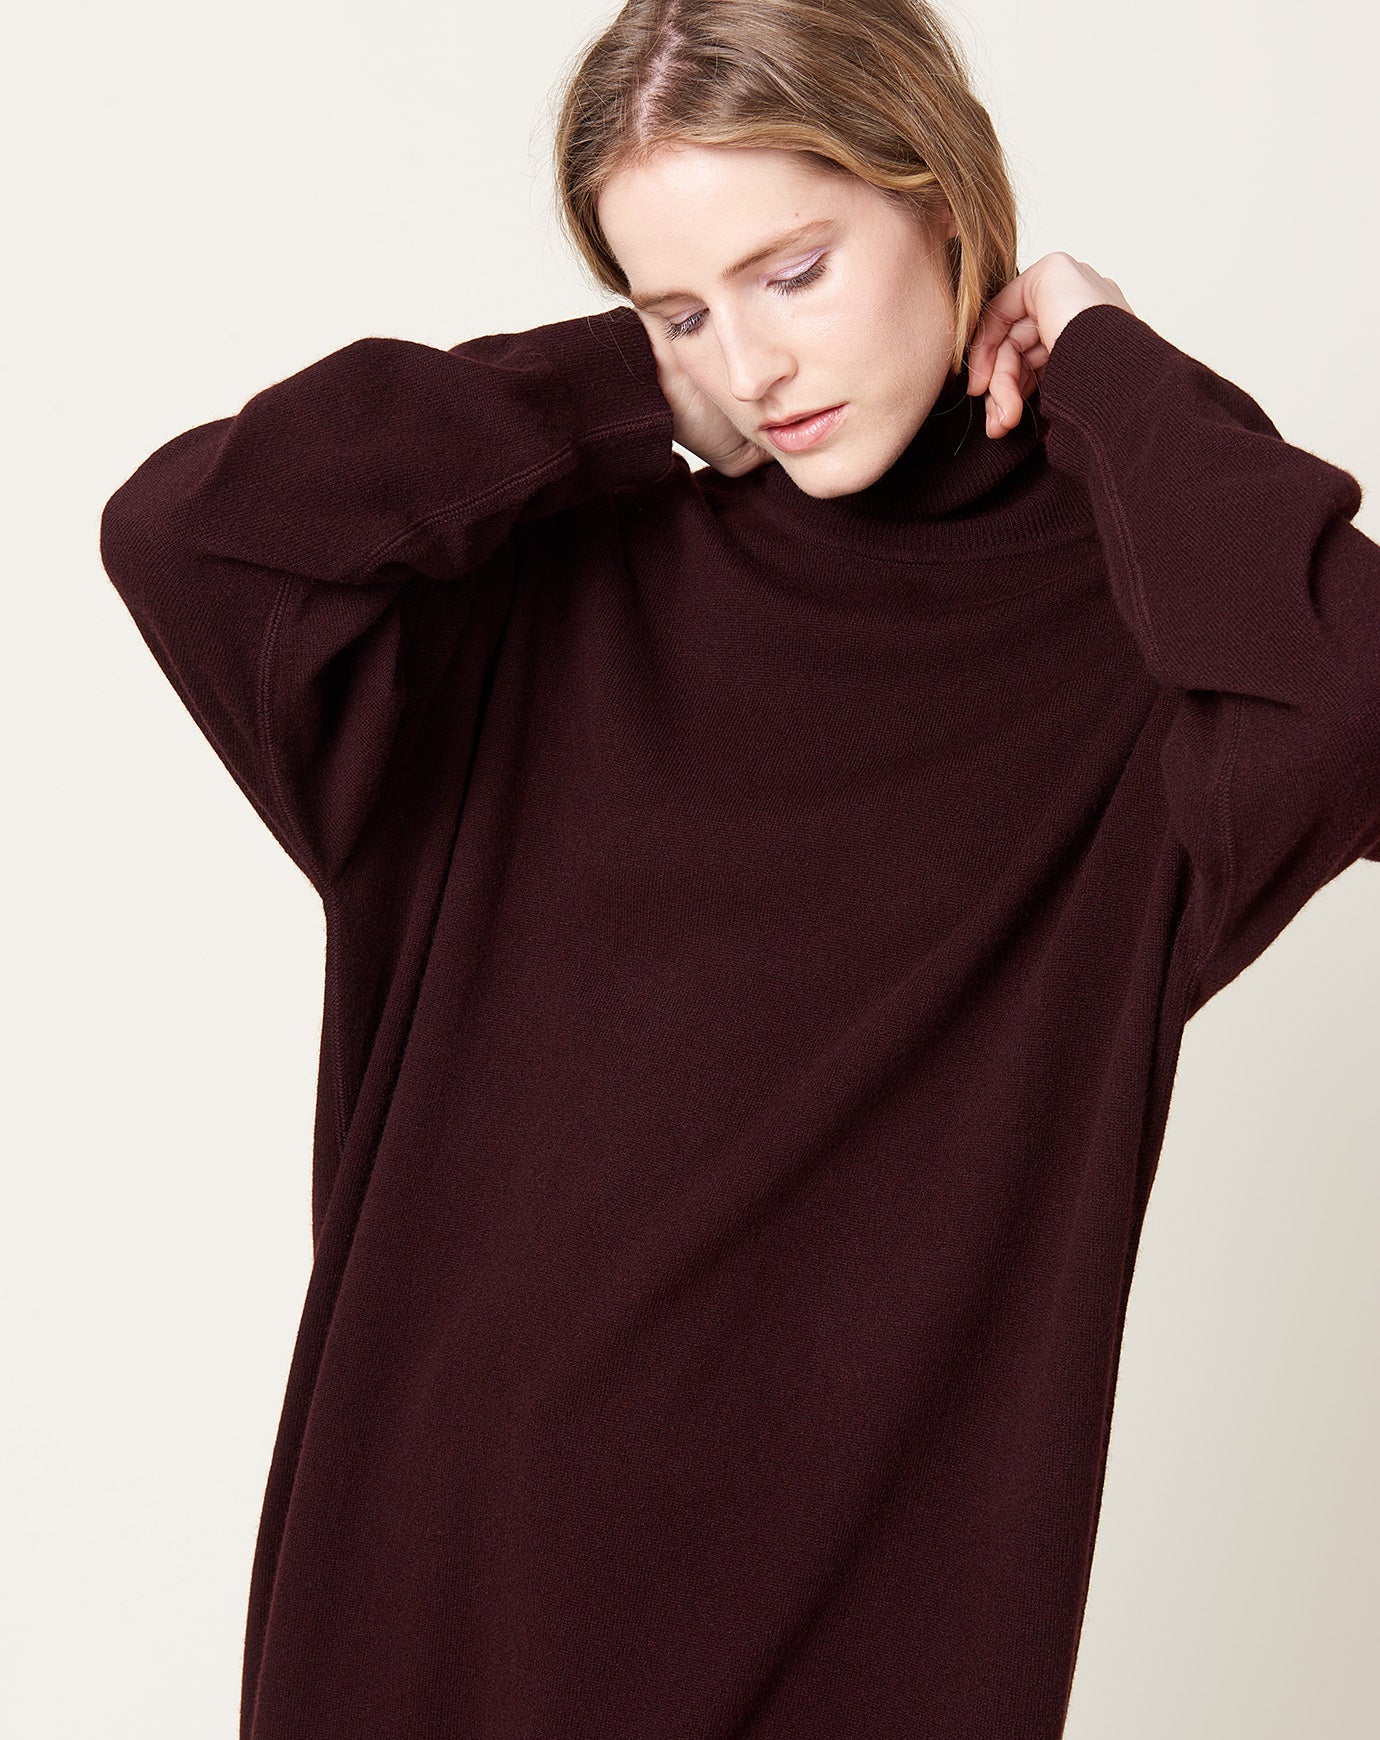 6397 Slouchy Turtleneck in Chocolate